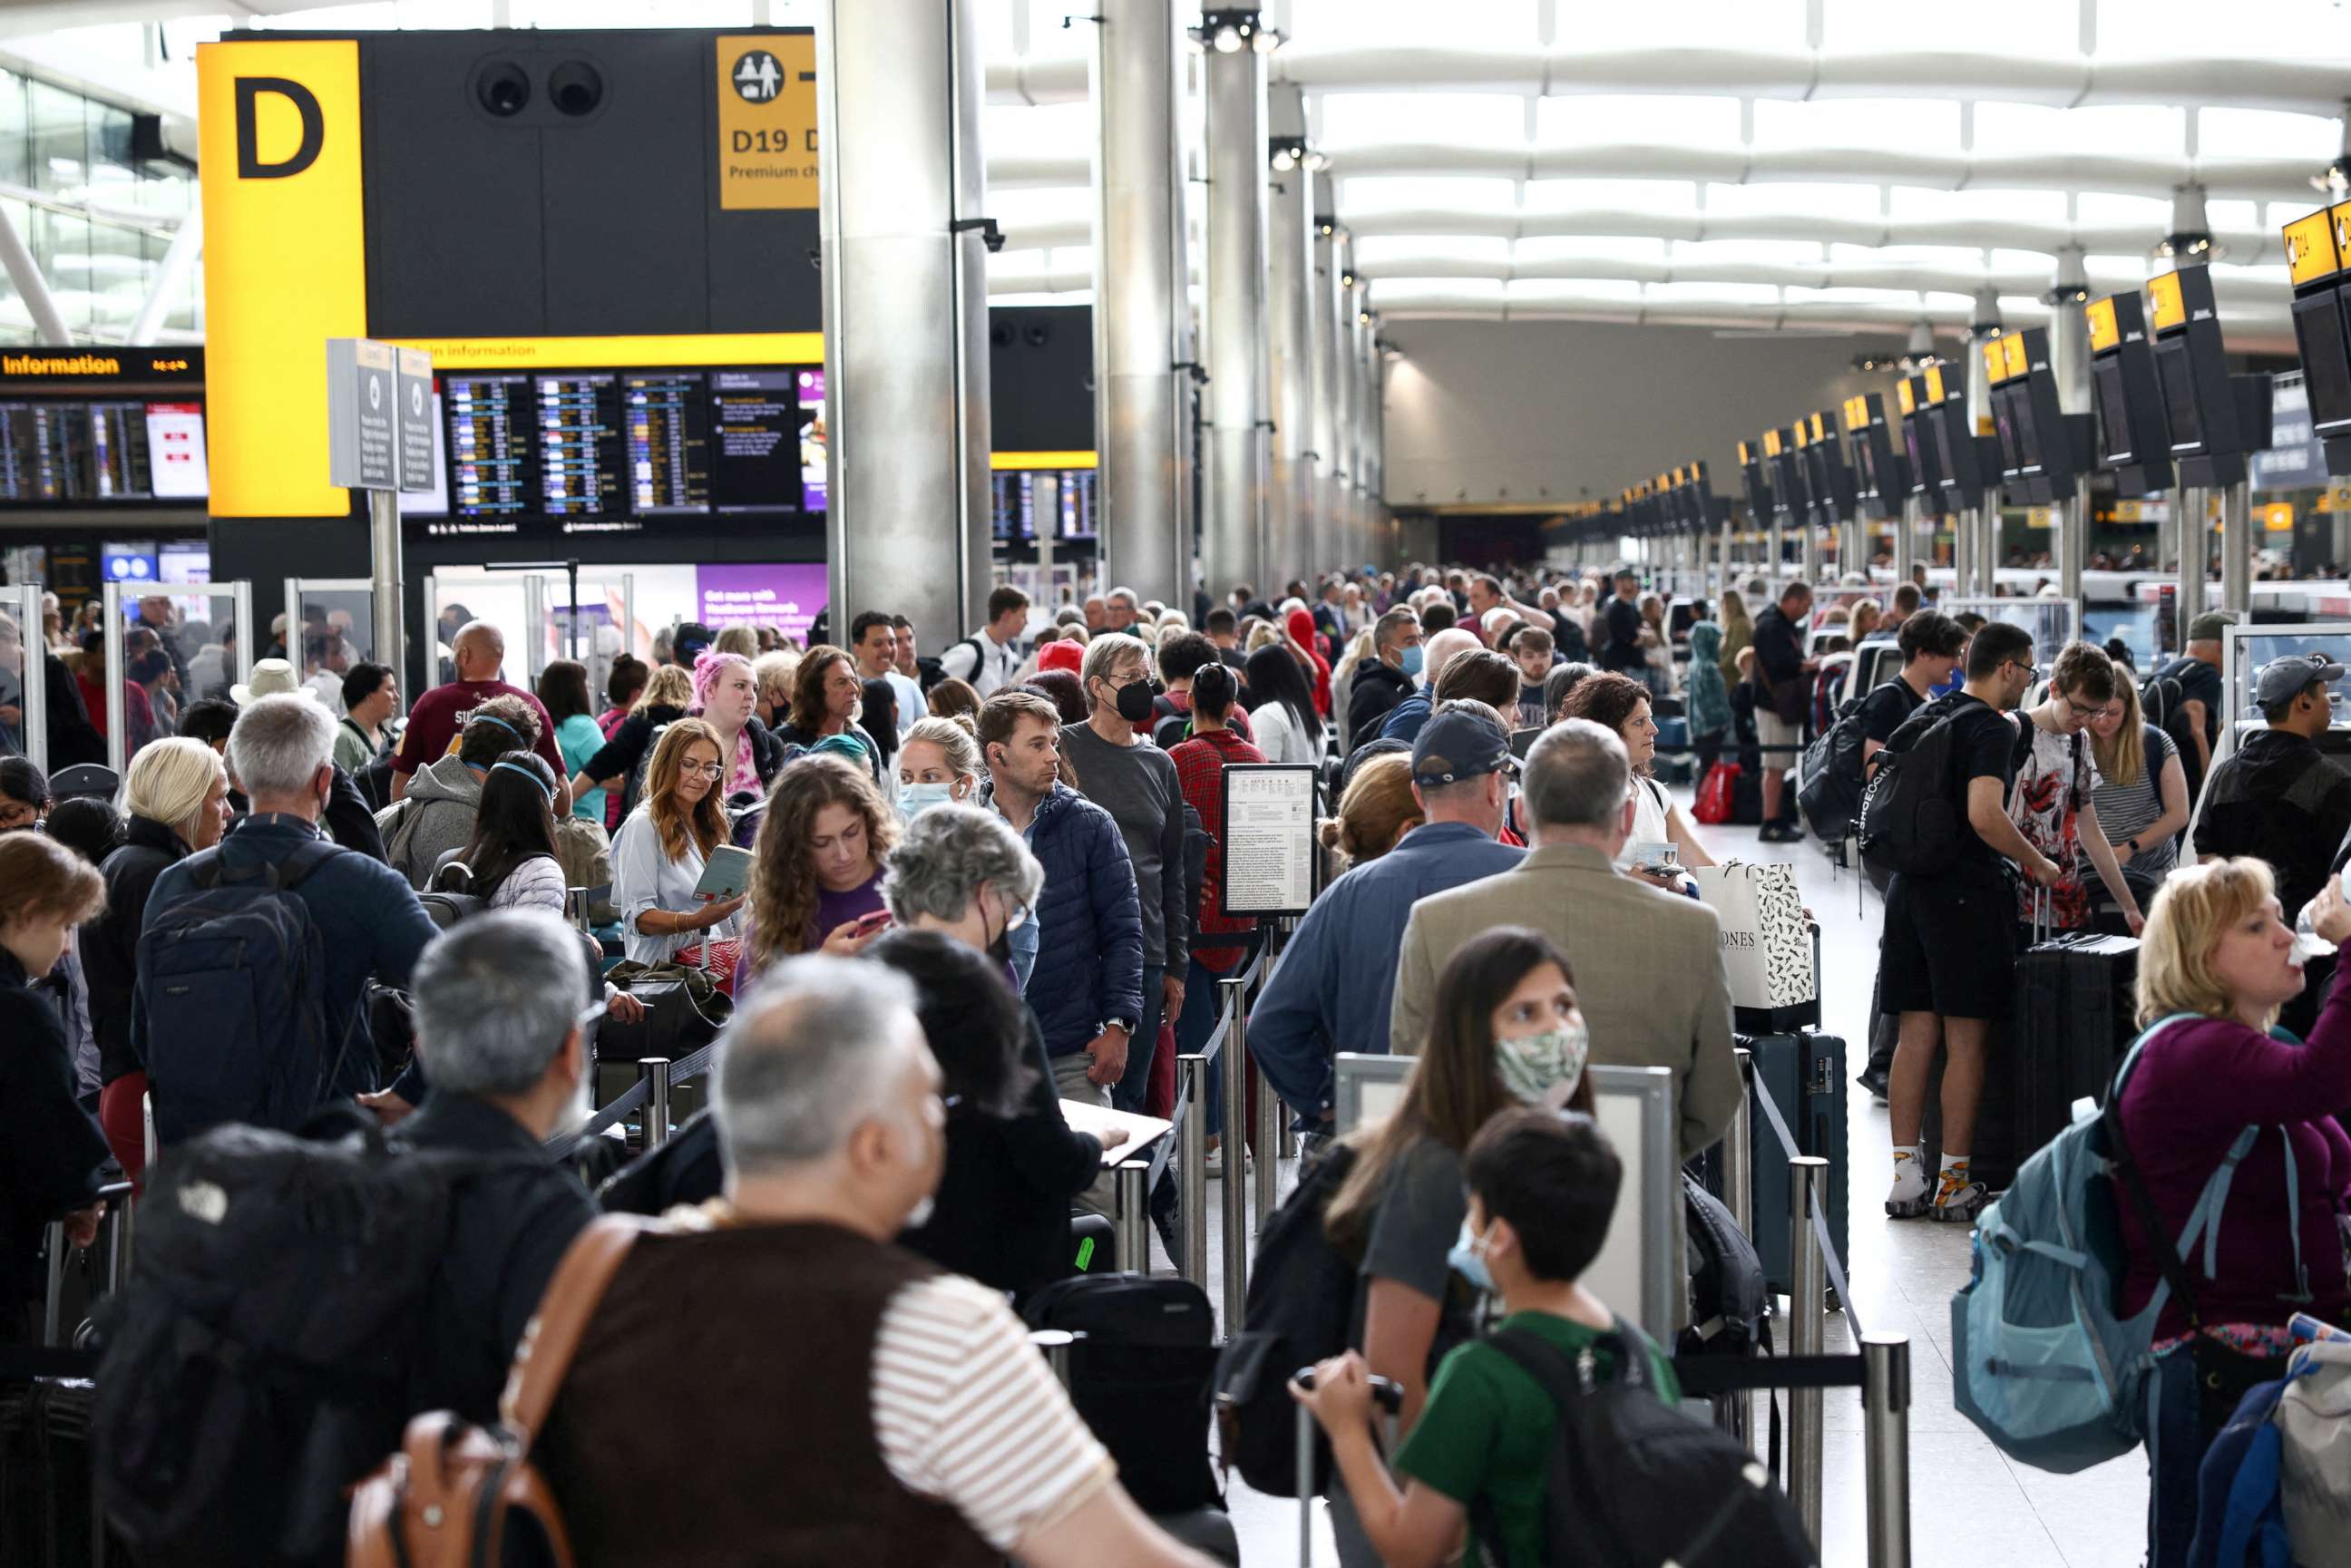 PHOTO: Passengers queue inside the departures terminal of Terminal 2 at Heathrow Airport in London, June 27, 2022.